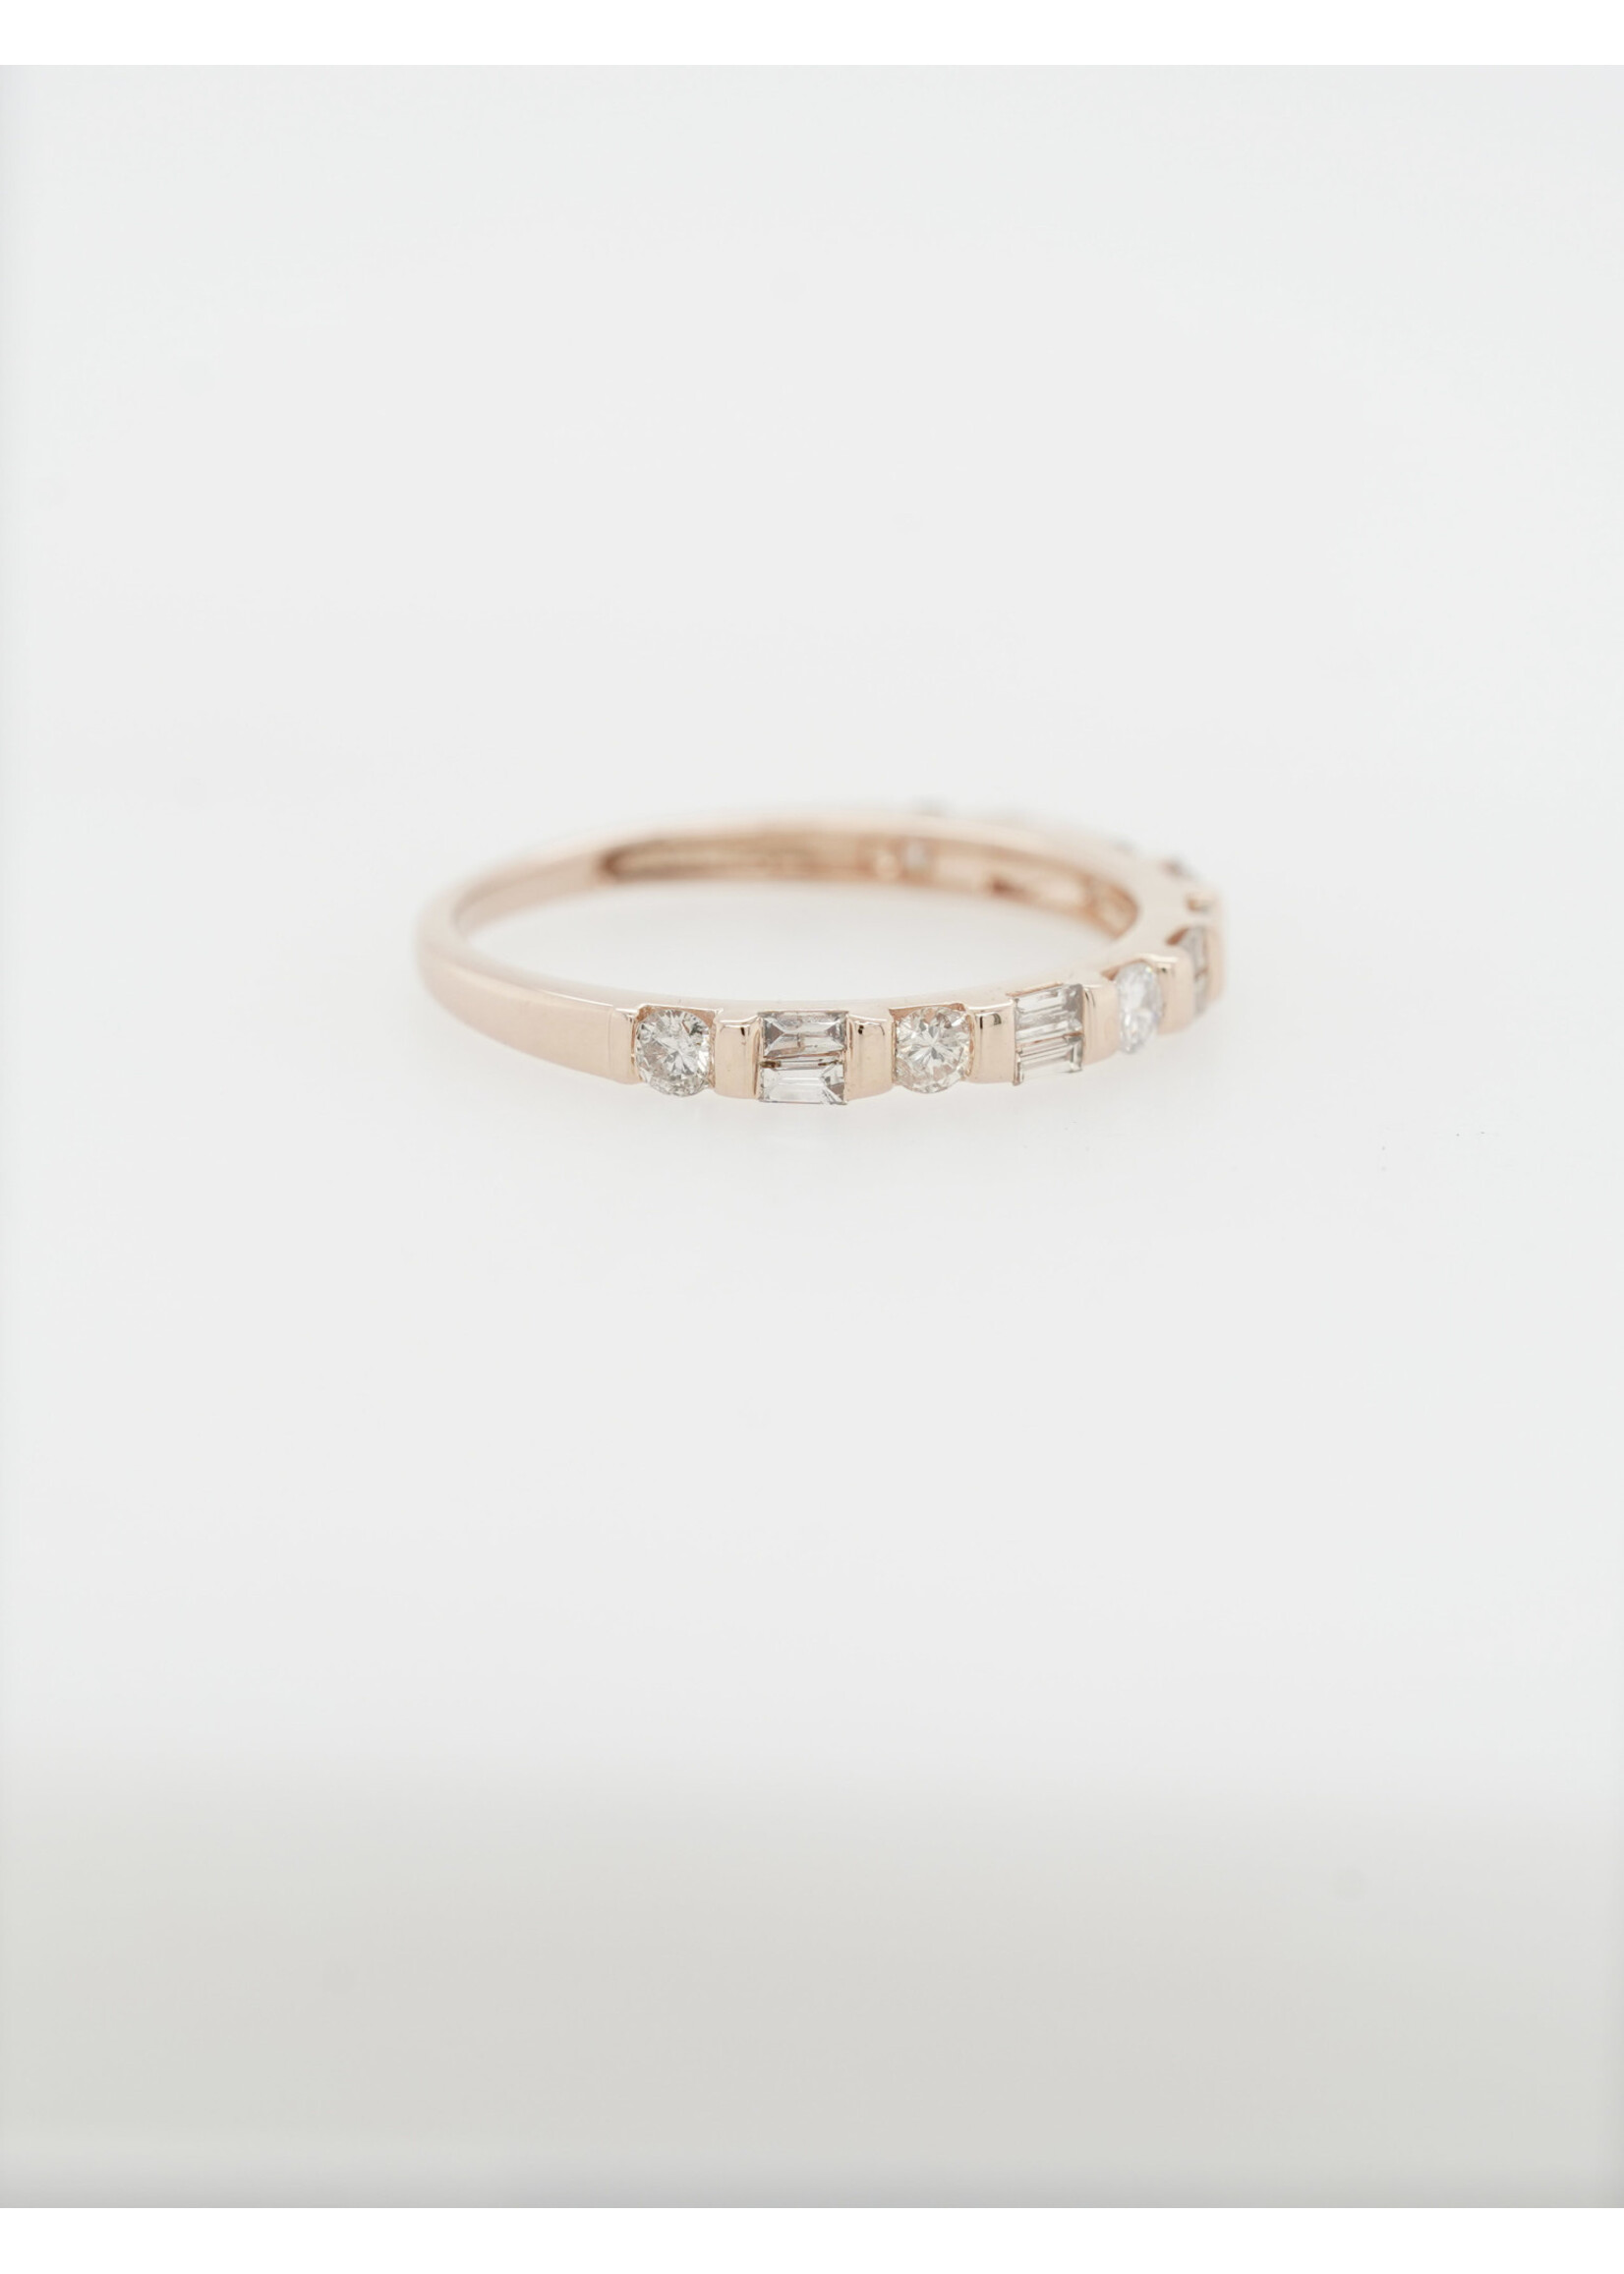 14KR 1.7g .52ctw Diamond Stackable Band (size 7)